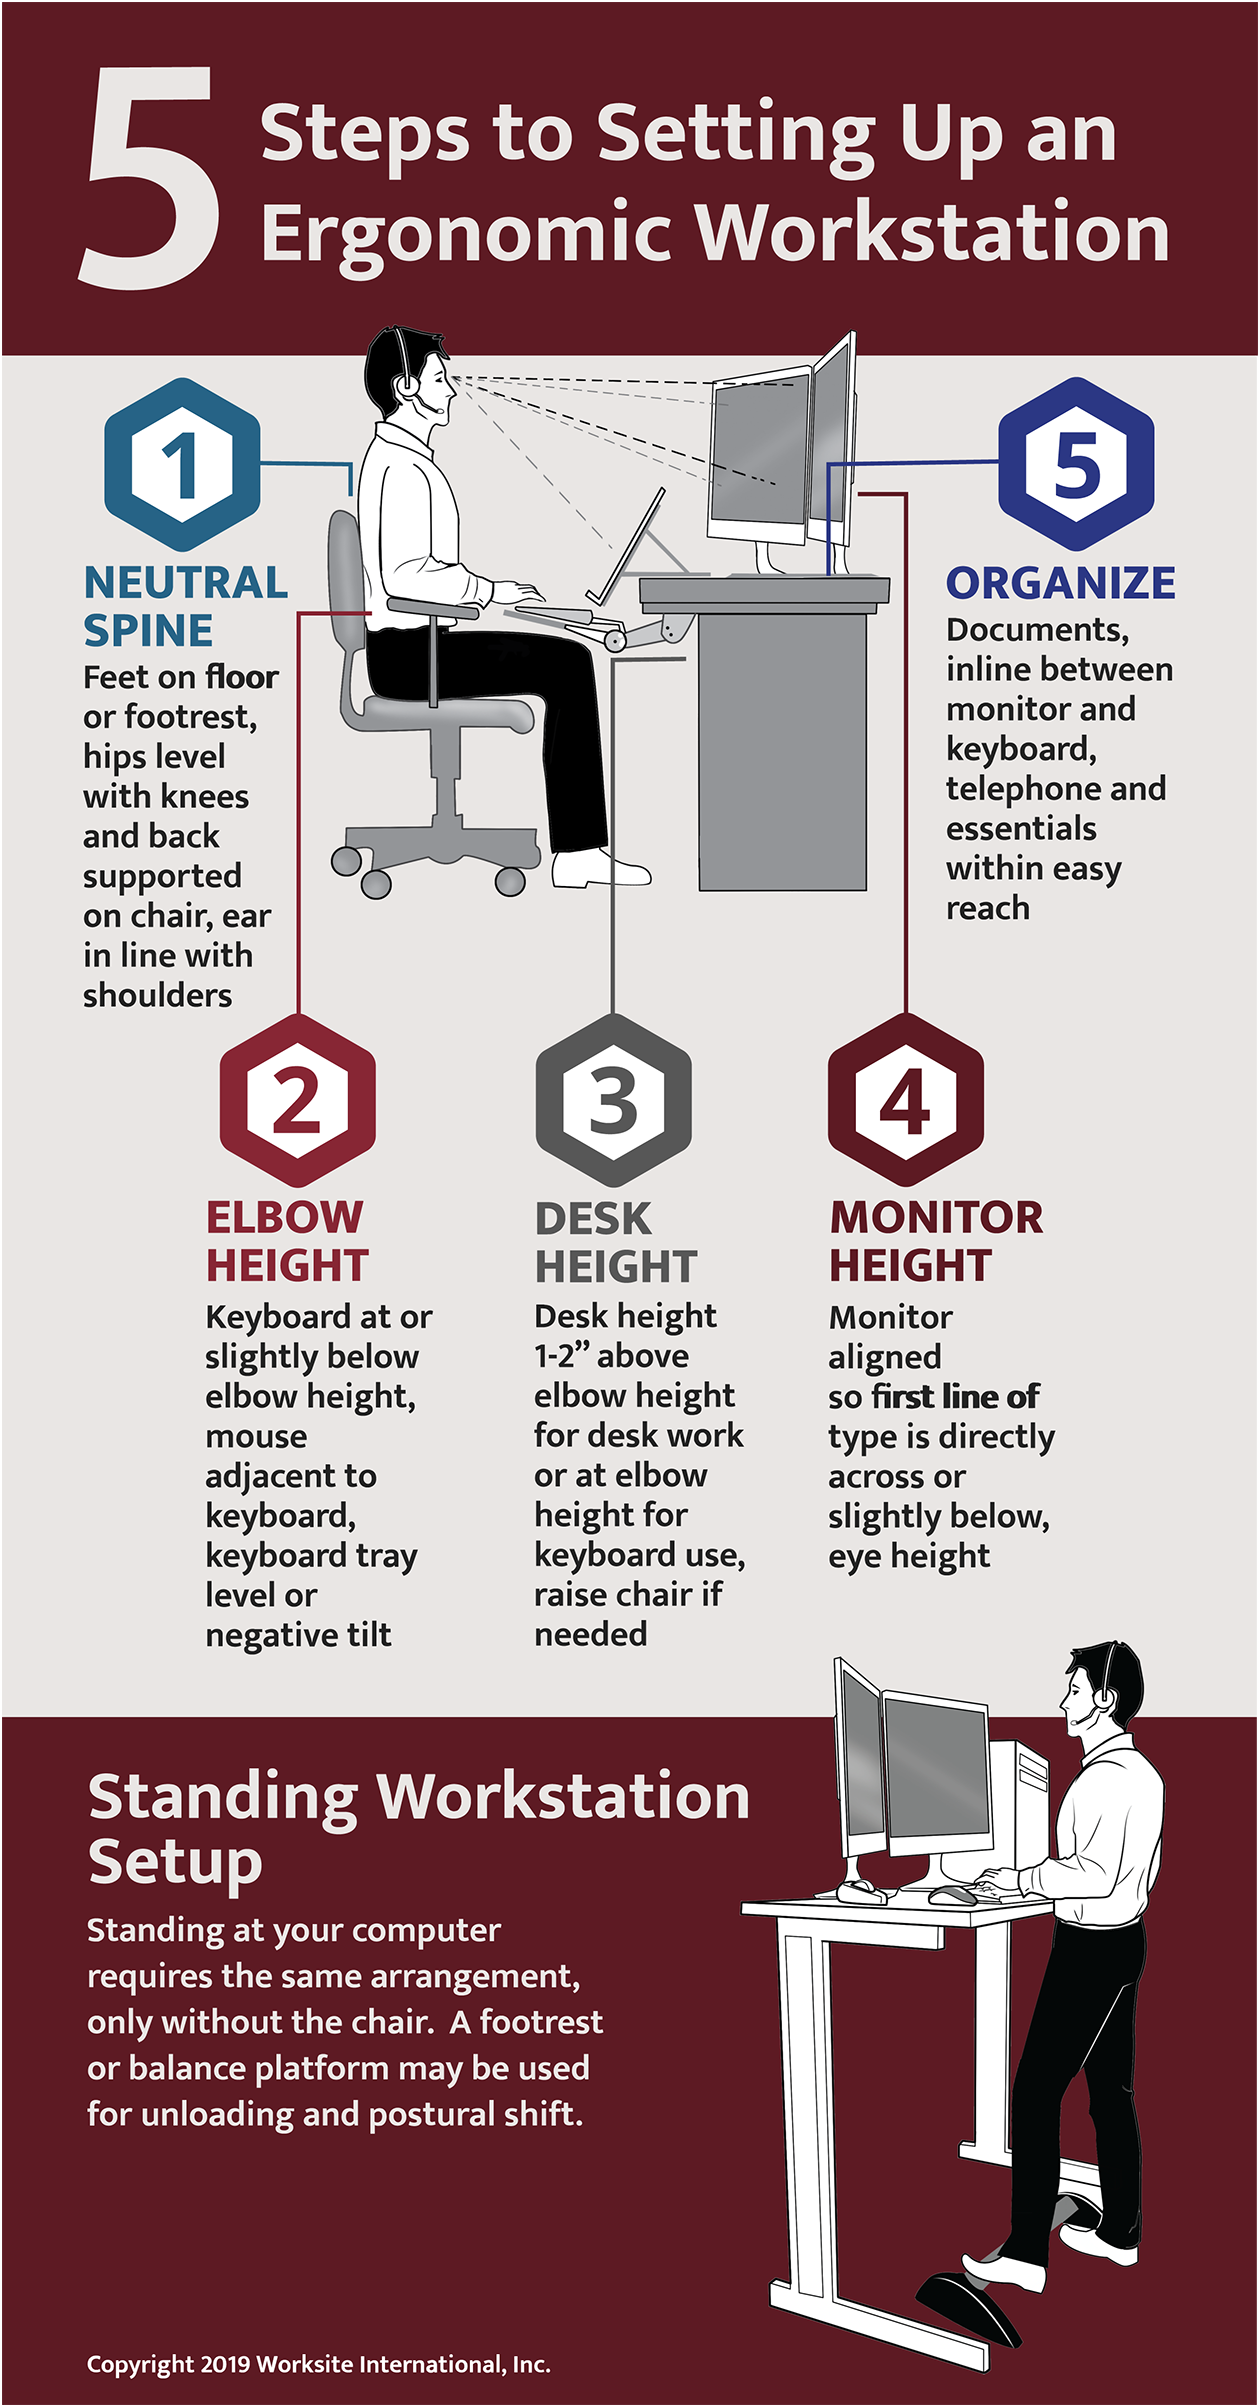 5 Steps To Setting Up An Ergonomic Workstation Infographic